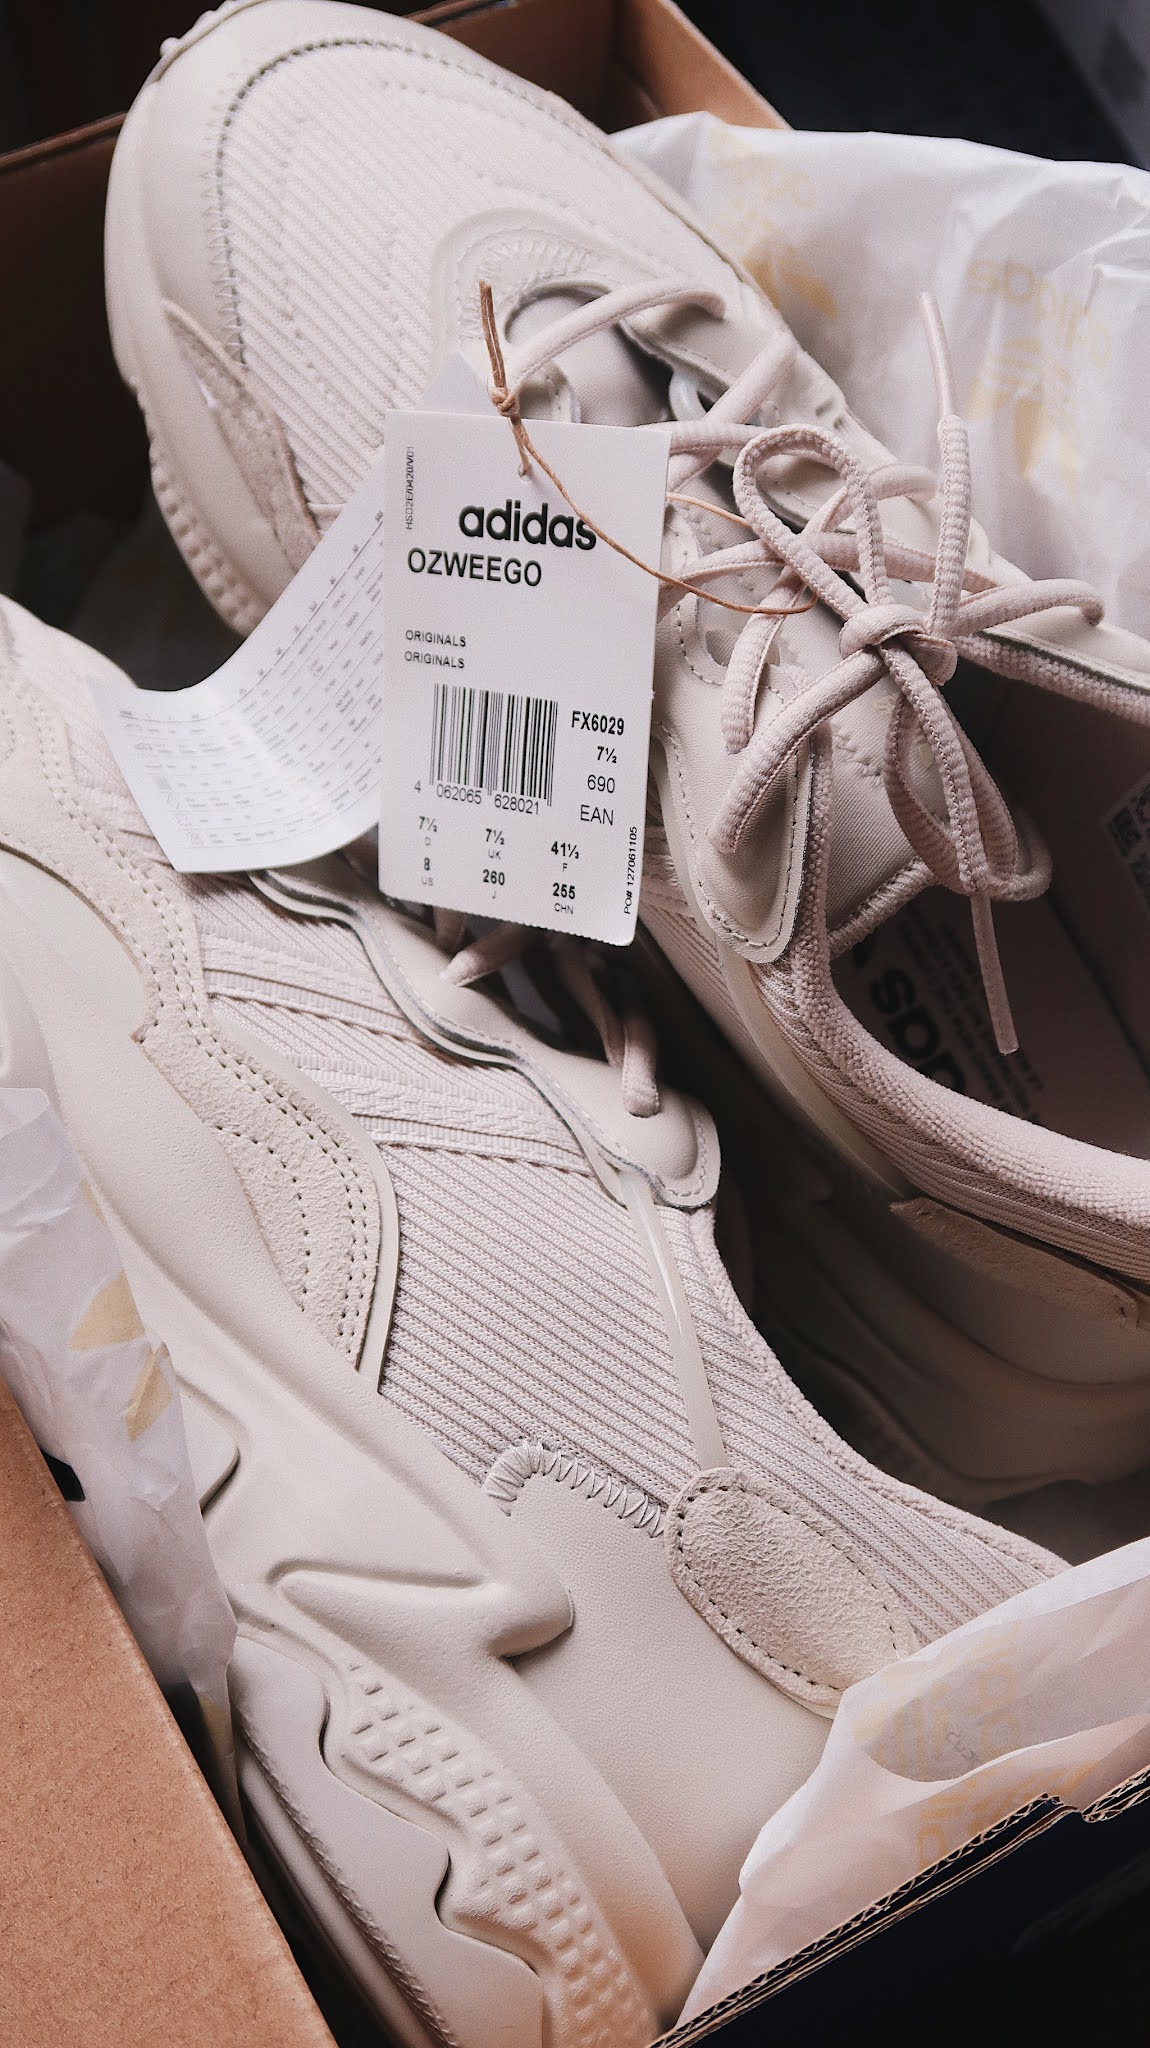 Adidas Ozweego Sneakers Review — Giselle Arianne